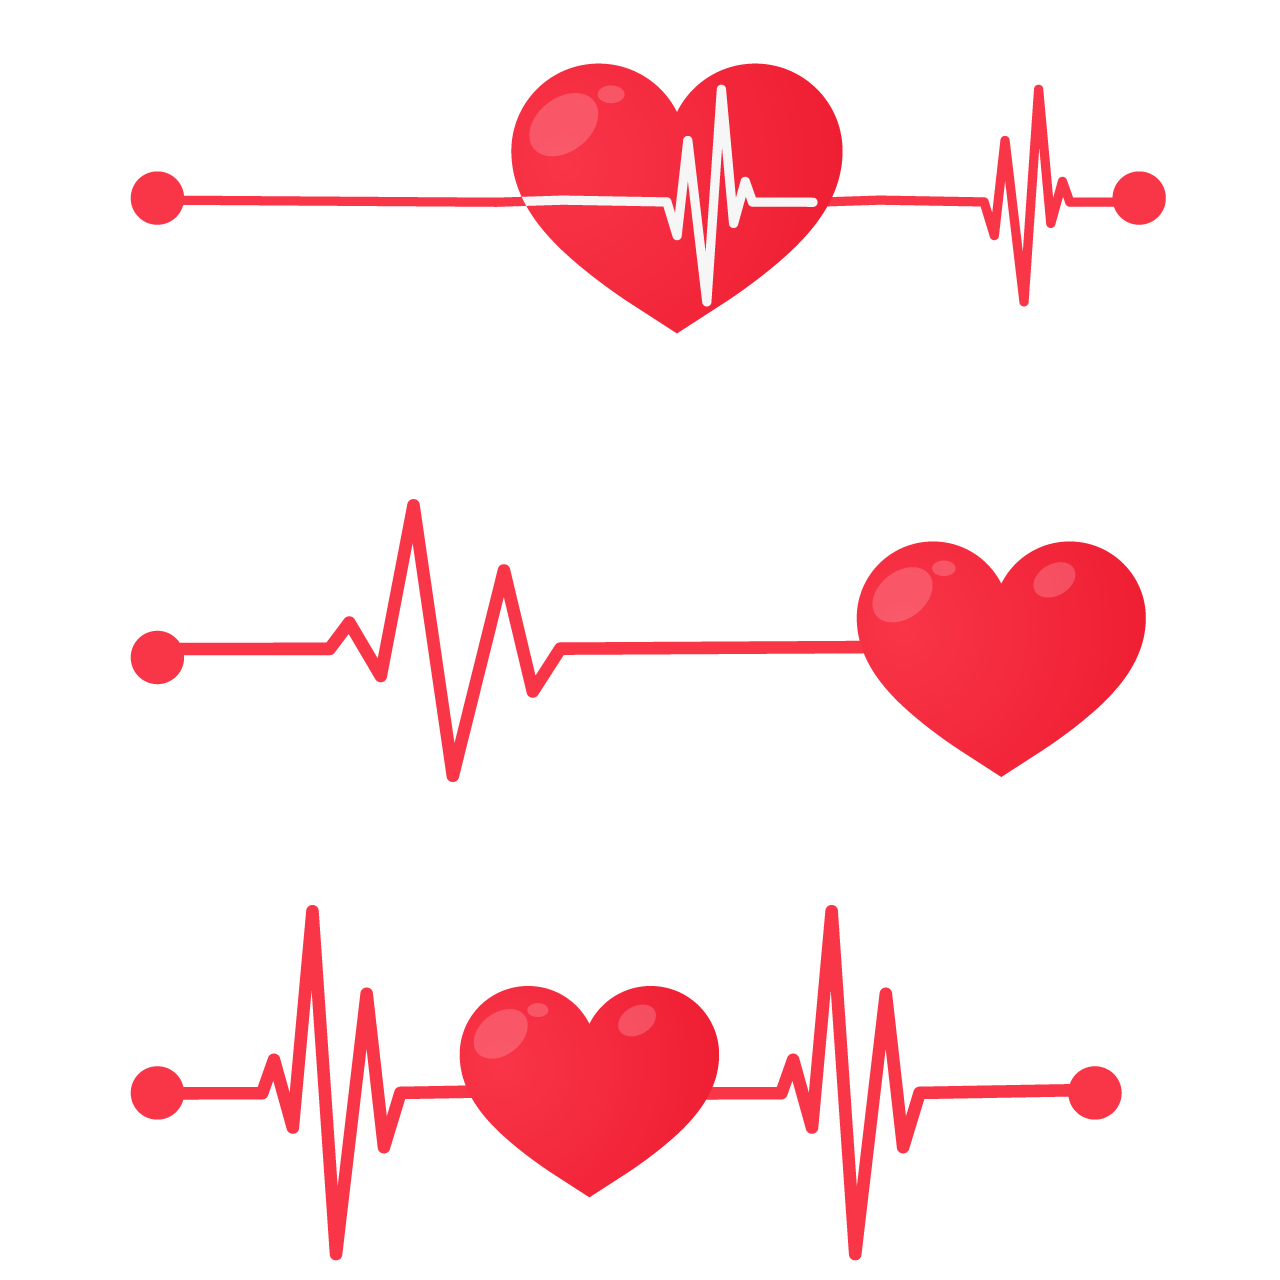 Red heart rate graph when exercising concept cartoon illustration image